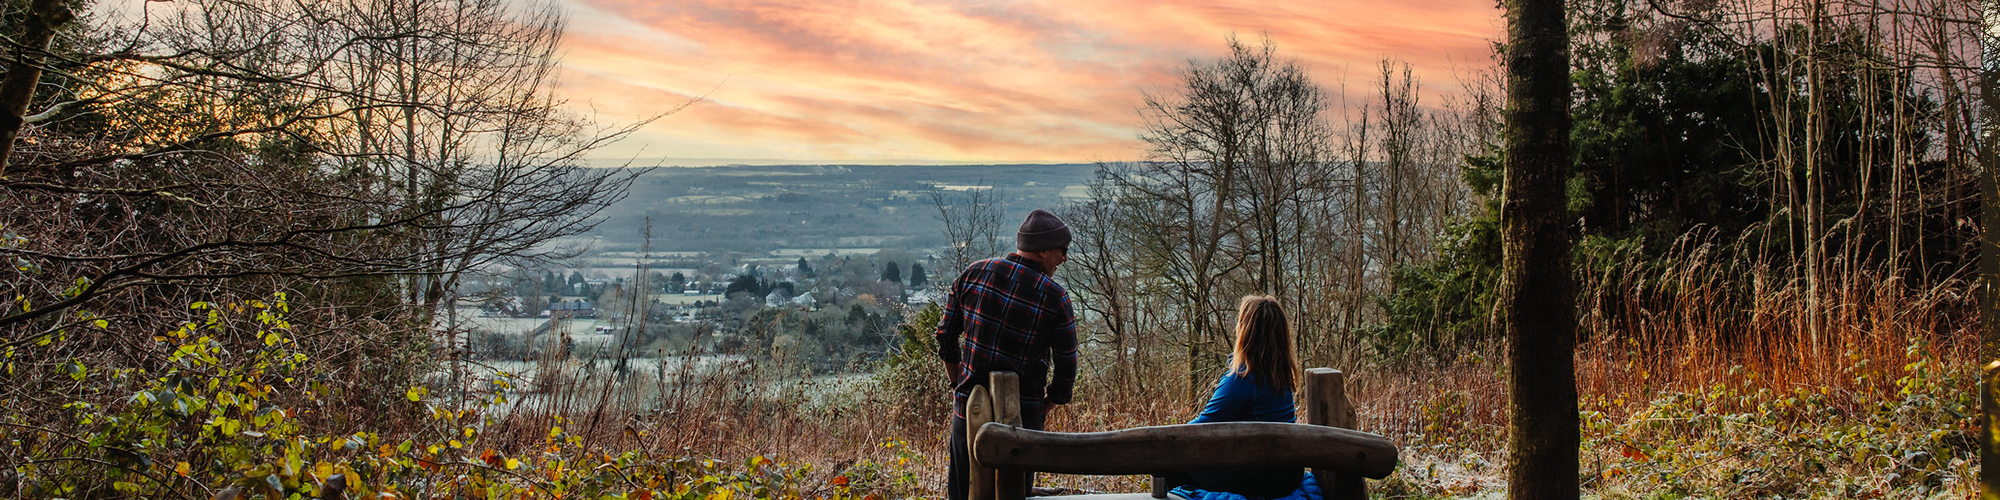 Image of family enjoying view over Kent Downs AONB